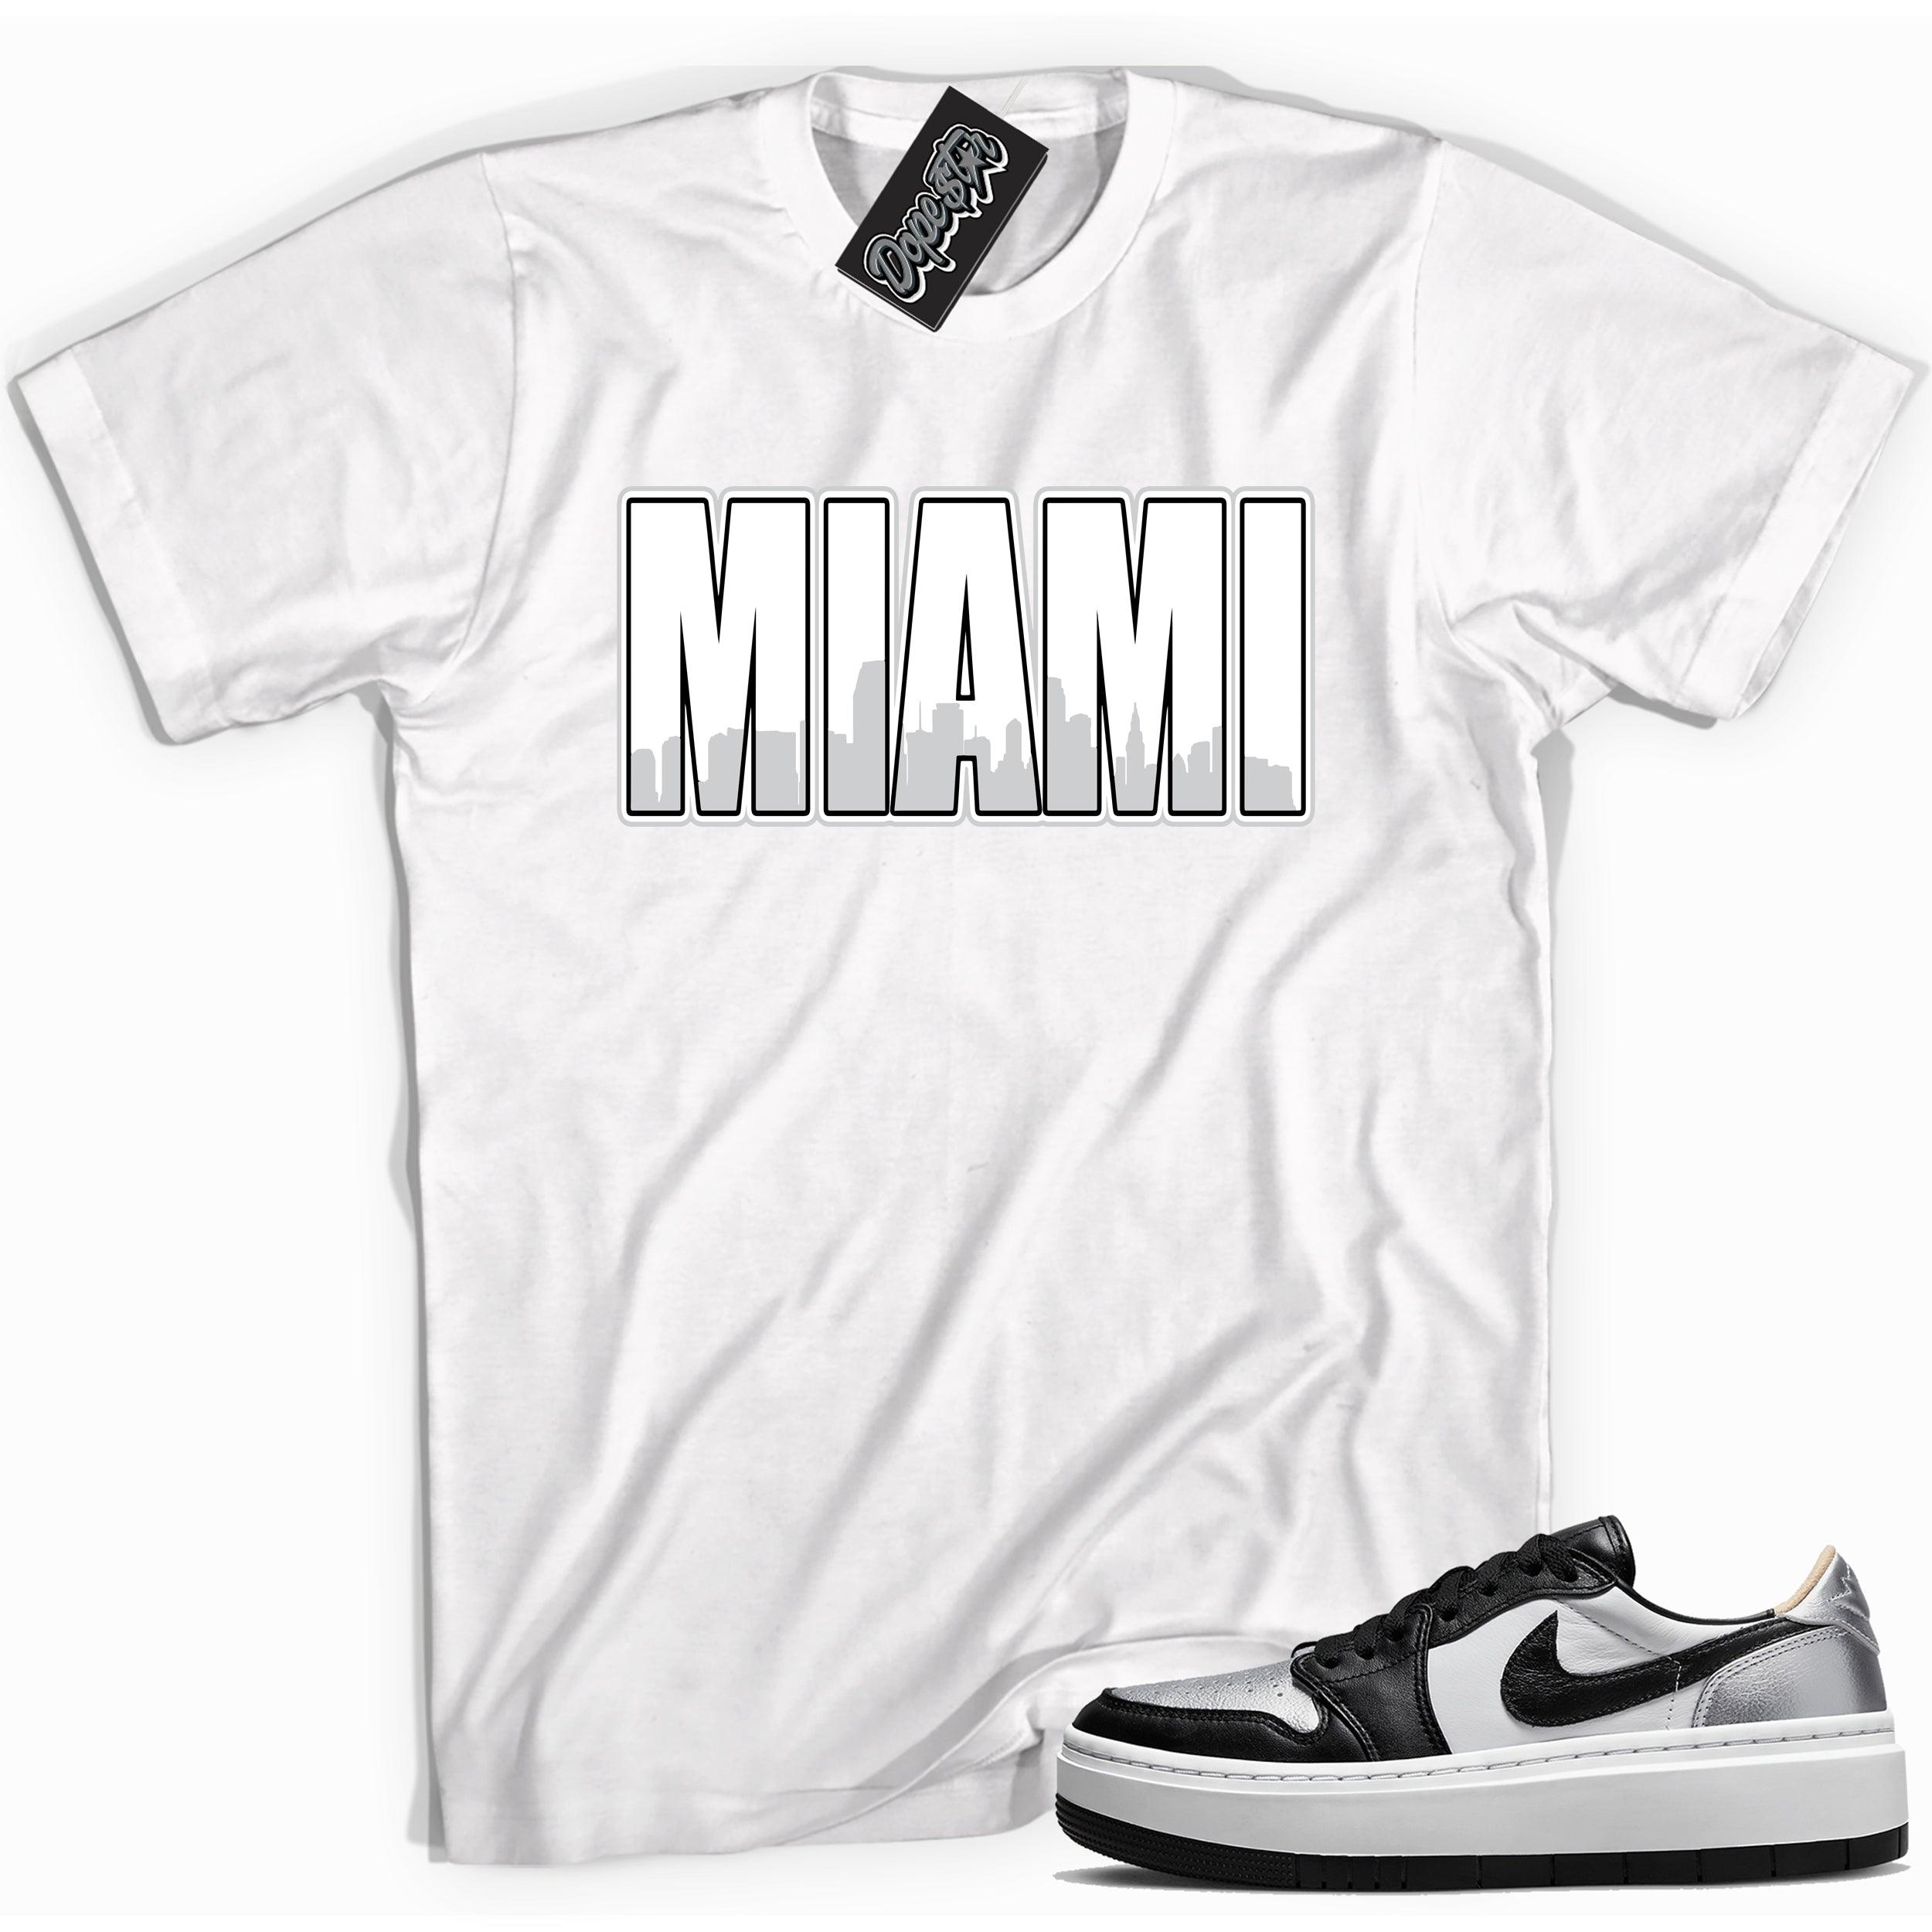 Cool white graphic tee with 'miami' print, that perfectly matches Air Jordan 1 Elevate Low SE Silver Toe sneakers.